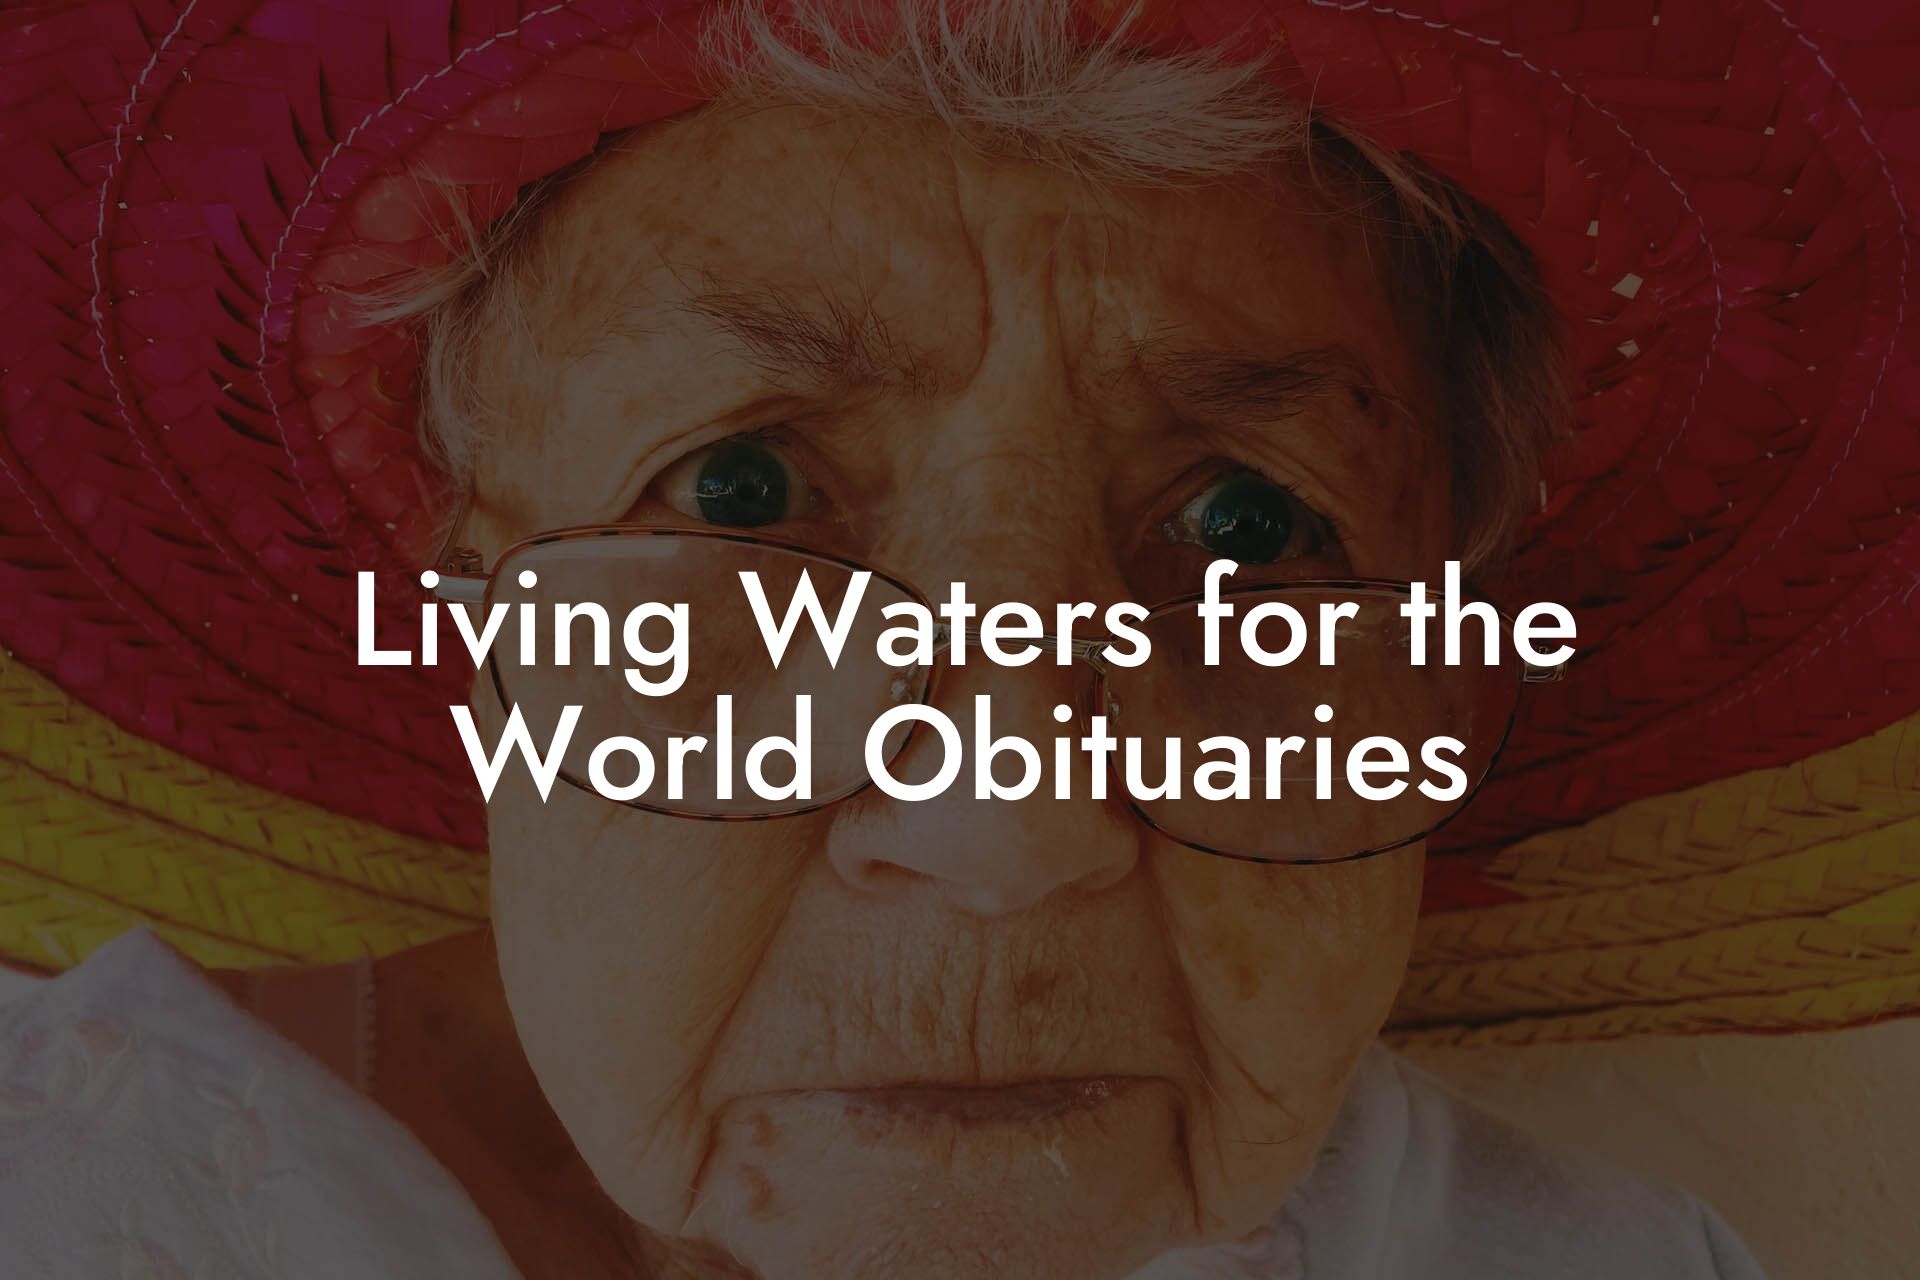 Living Waters for the World Obituaries